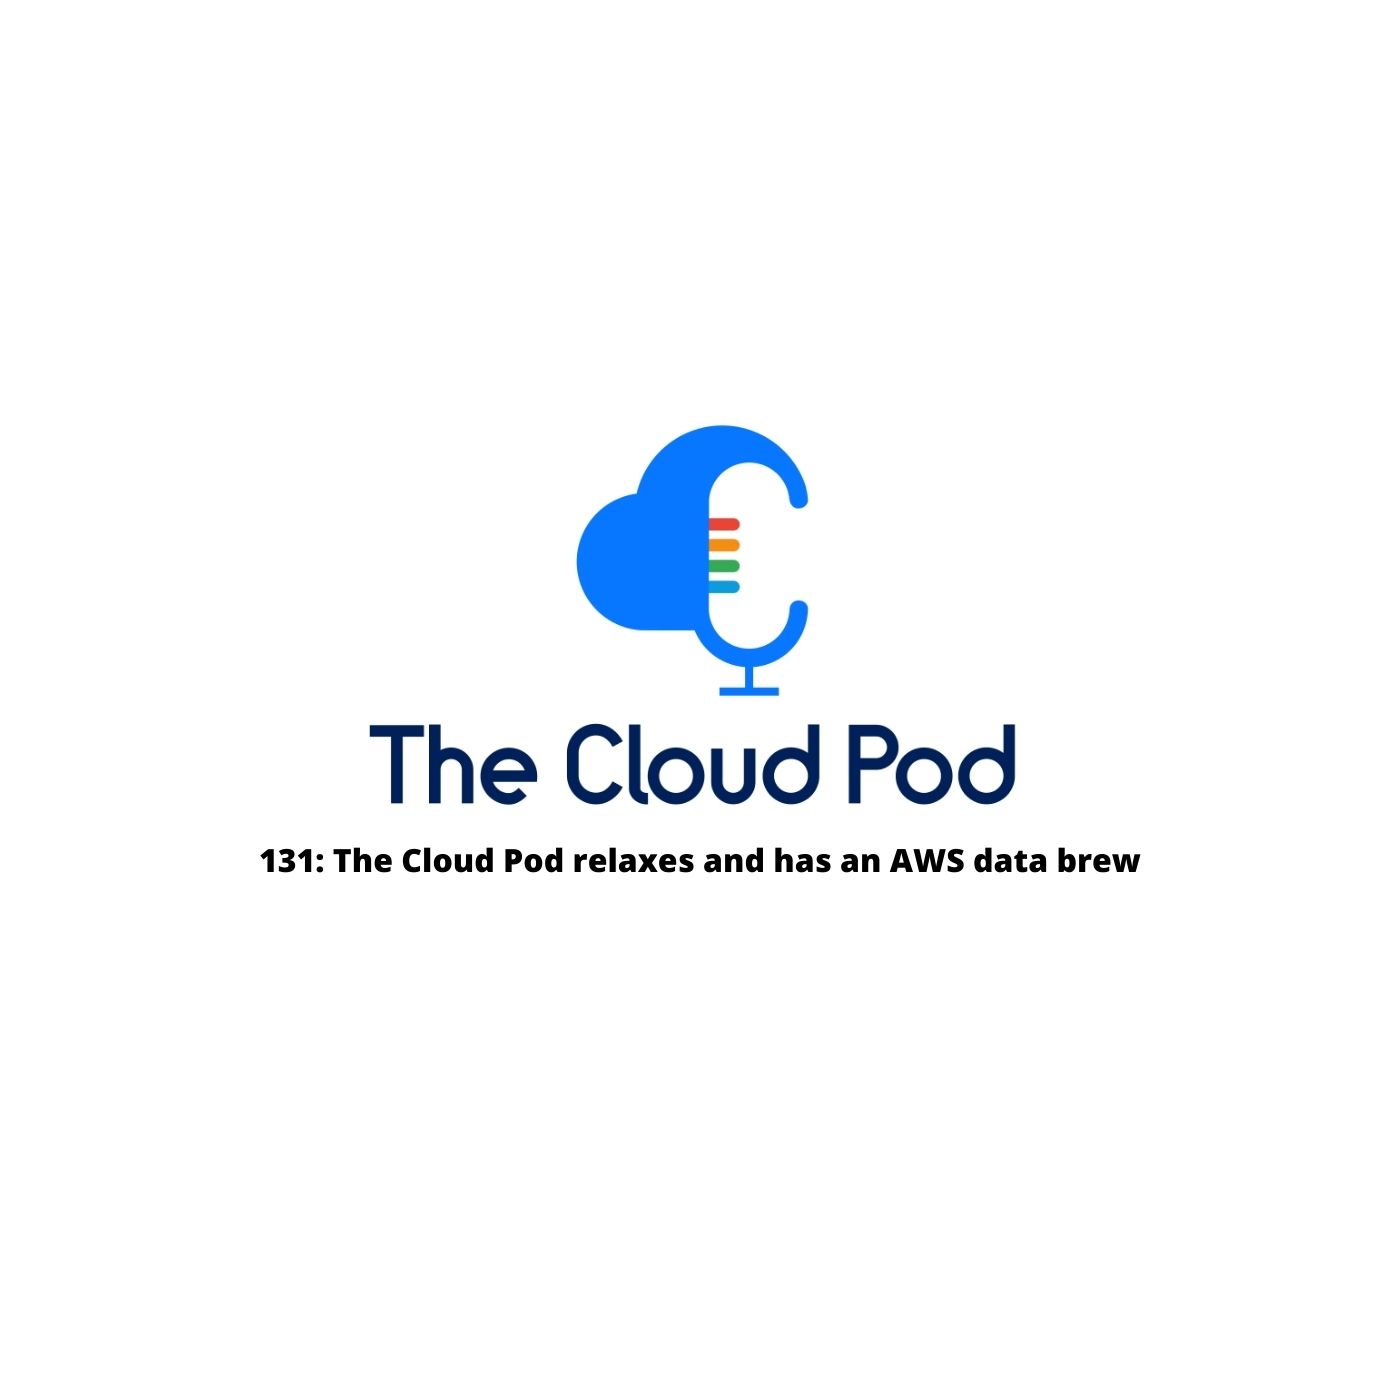 131: The Cloud Pod relaxes and has an AWS data brew